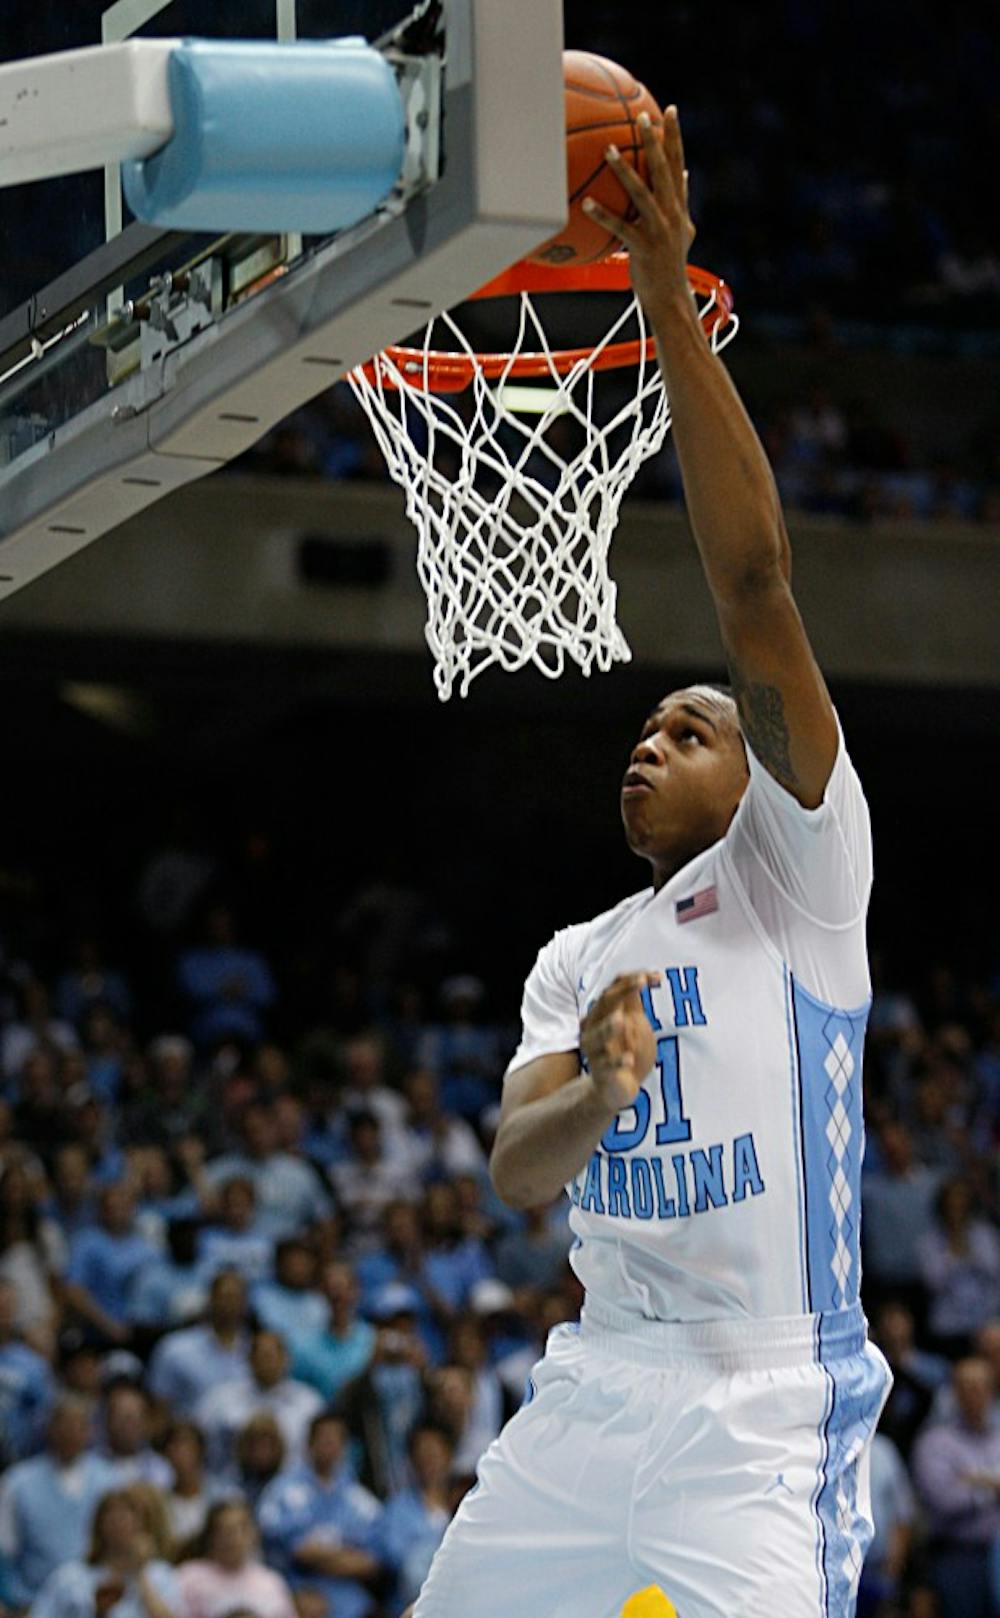 North Carolina forward John Henson lays the ball into the basket during the game against the Long Beach State at the Dean E. Smith Center on Saturday. 